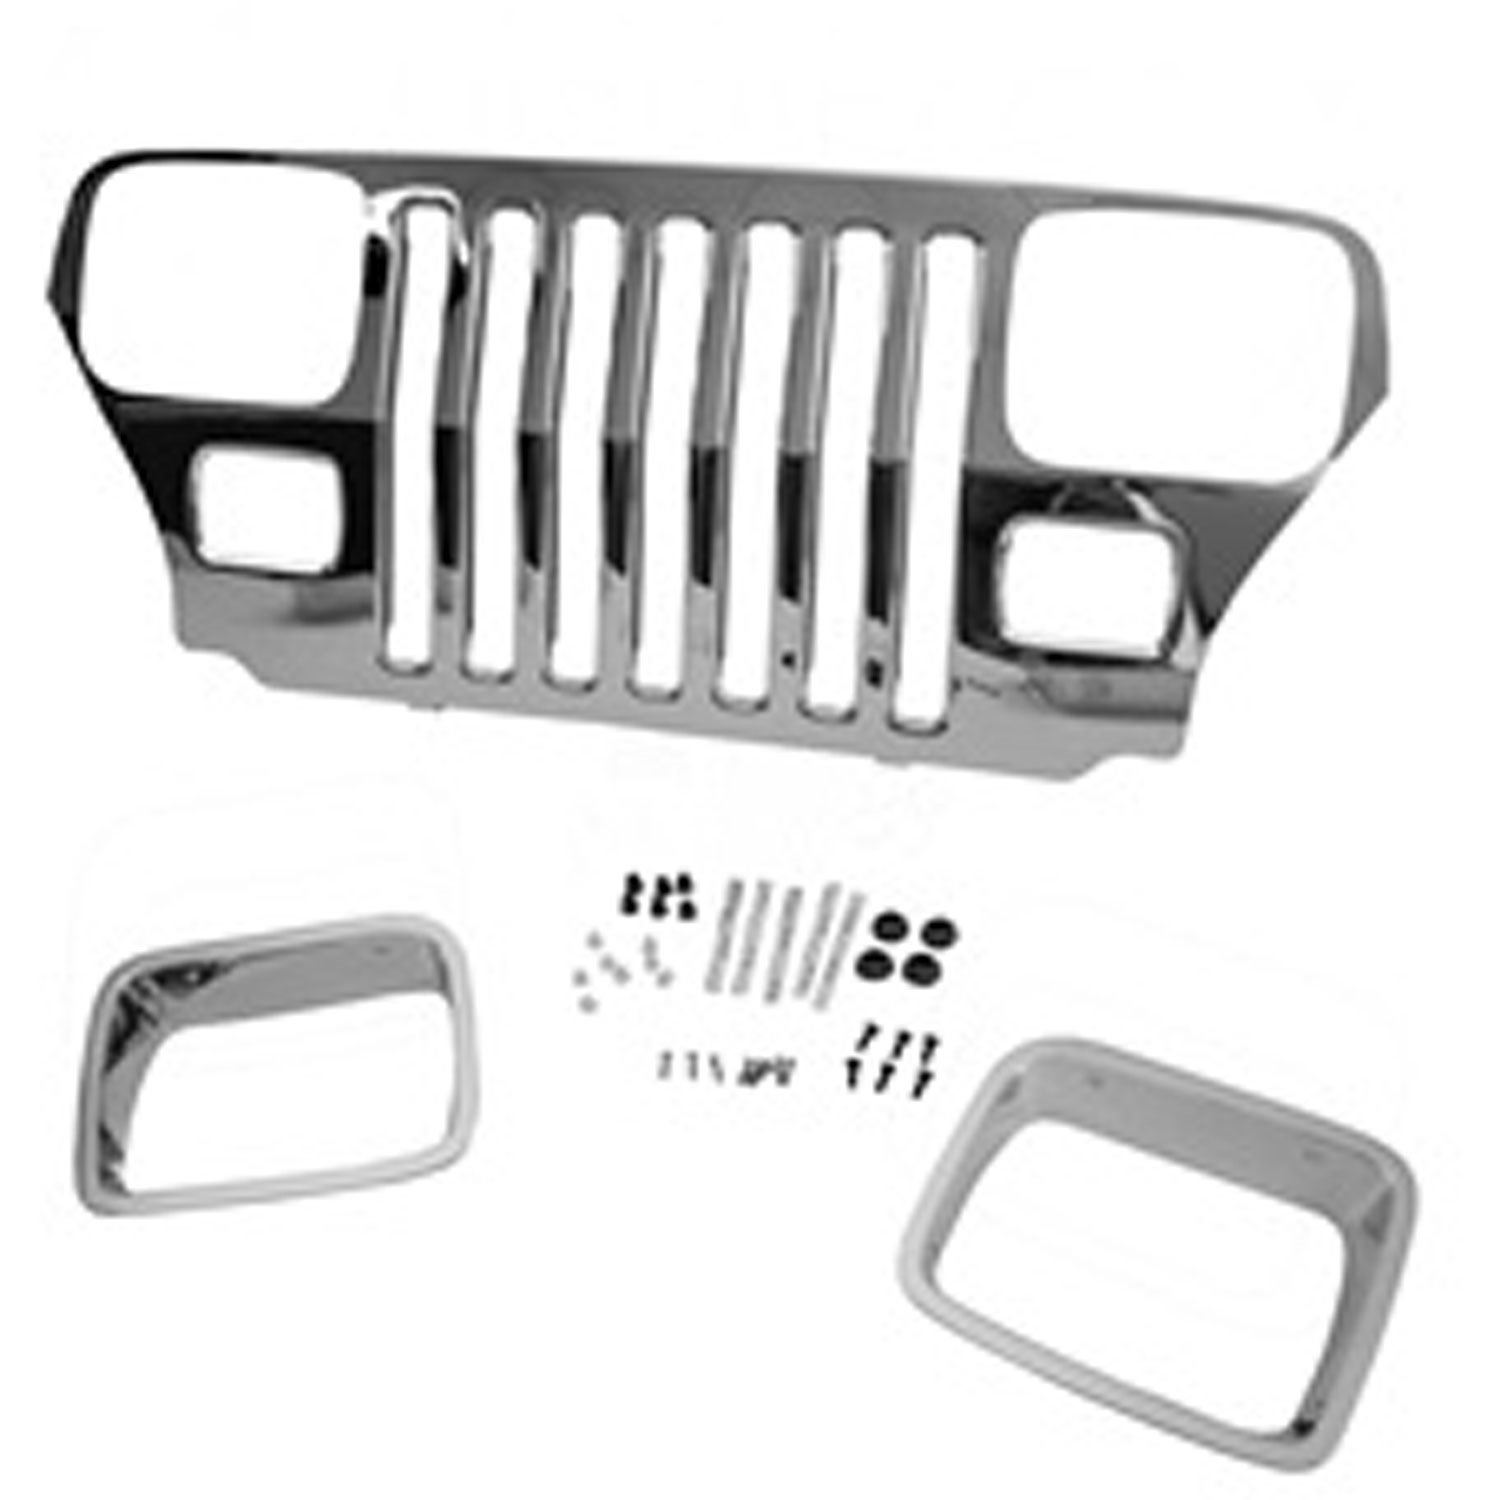 This chrome grille overlay from Mopar fits 87-95 Jeep Wrangler YJ .